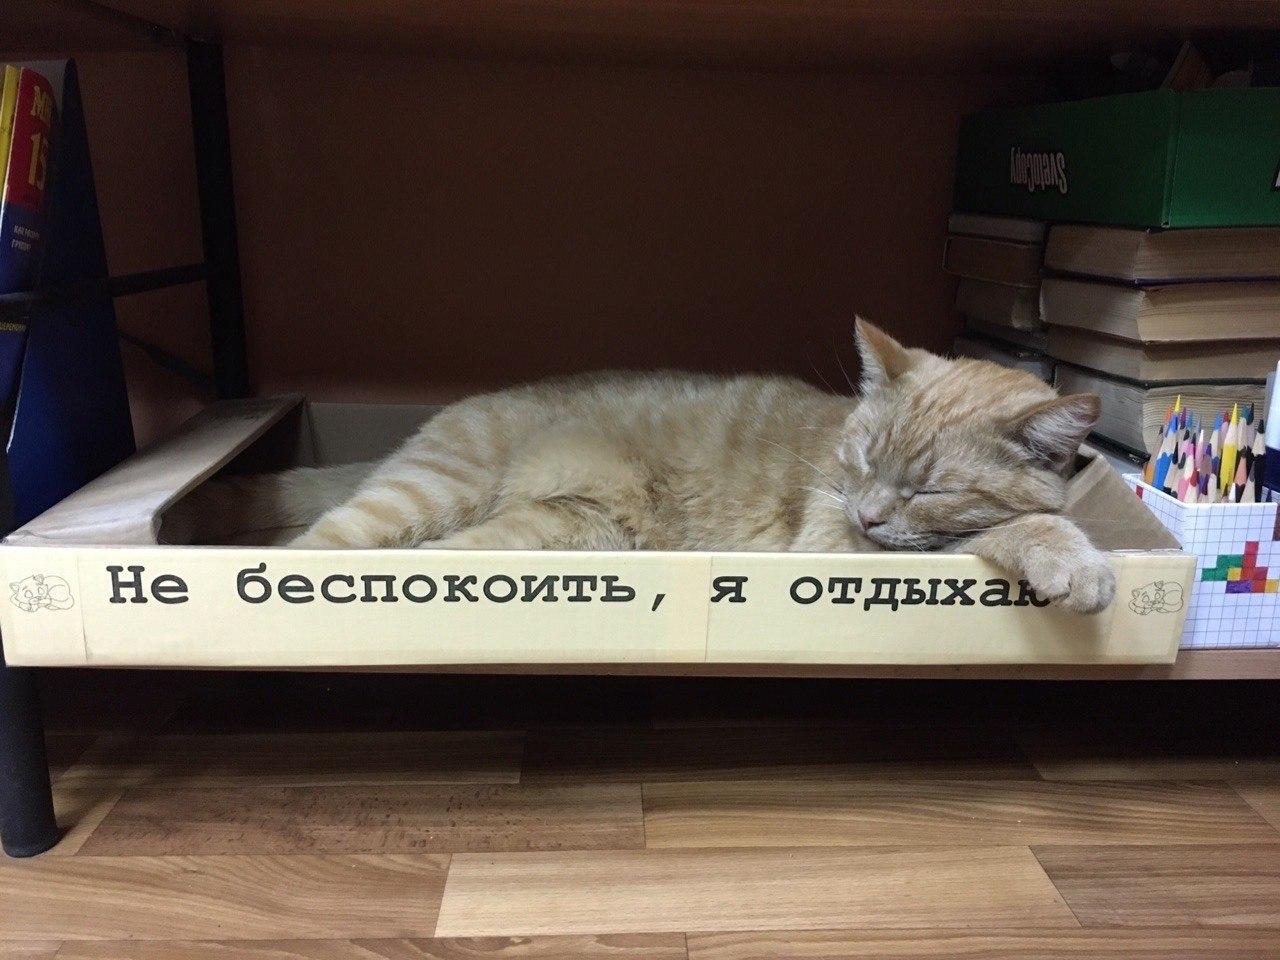 In the rural library in the Tver region, a cat was hired